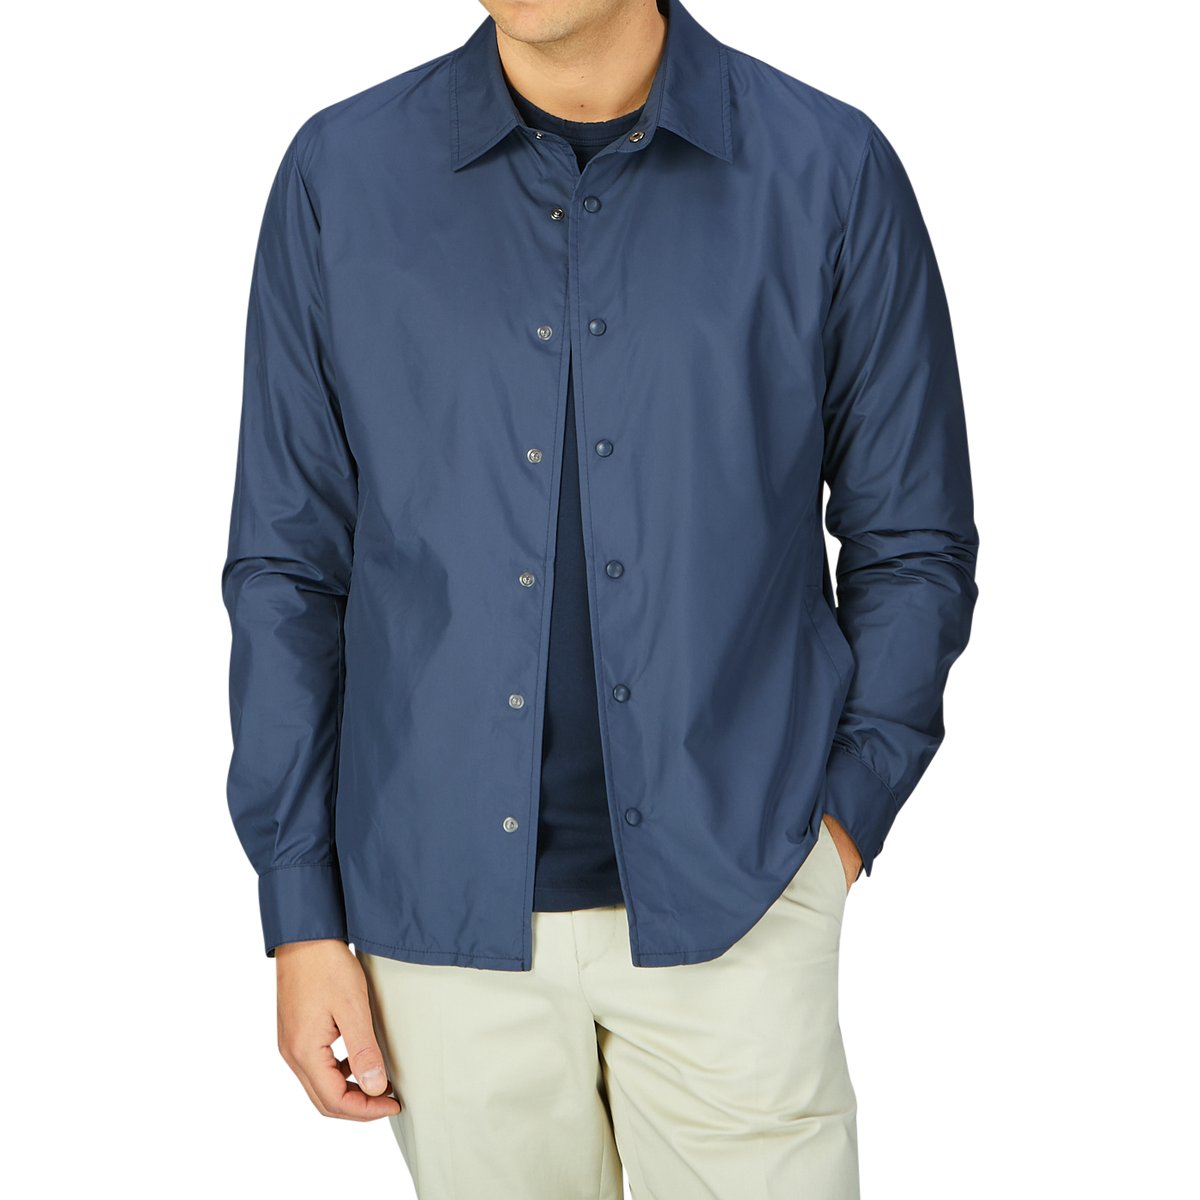 A man wearing a Mazzarelli navy blue nylon water resistant overshirt and cream trousers.